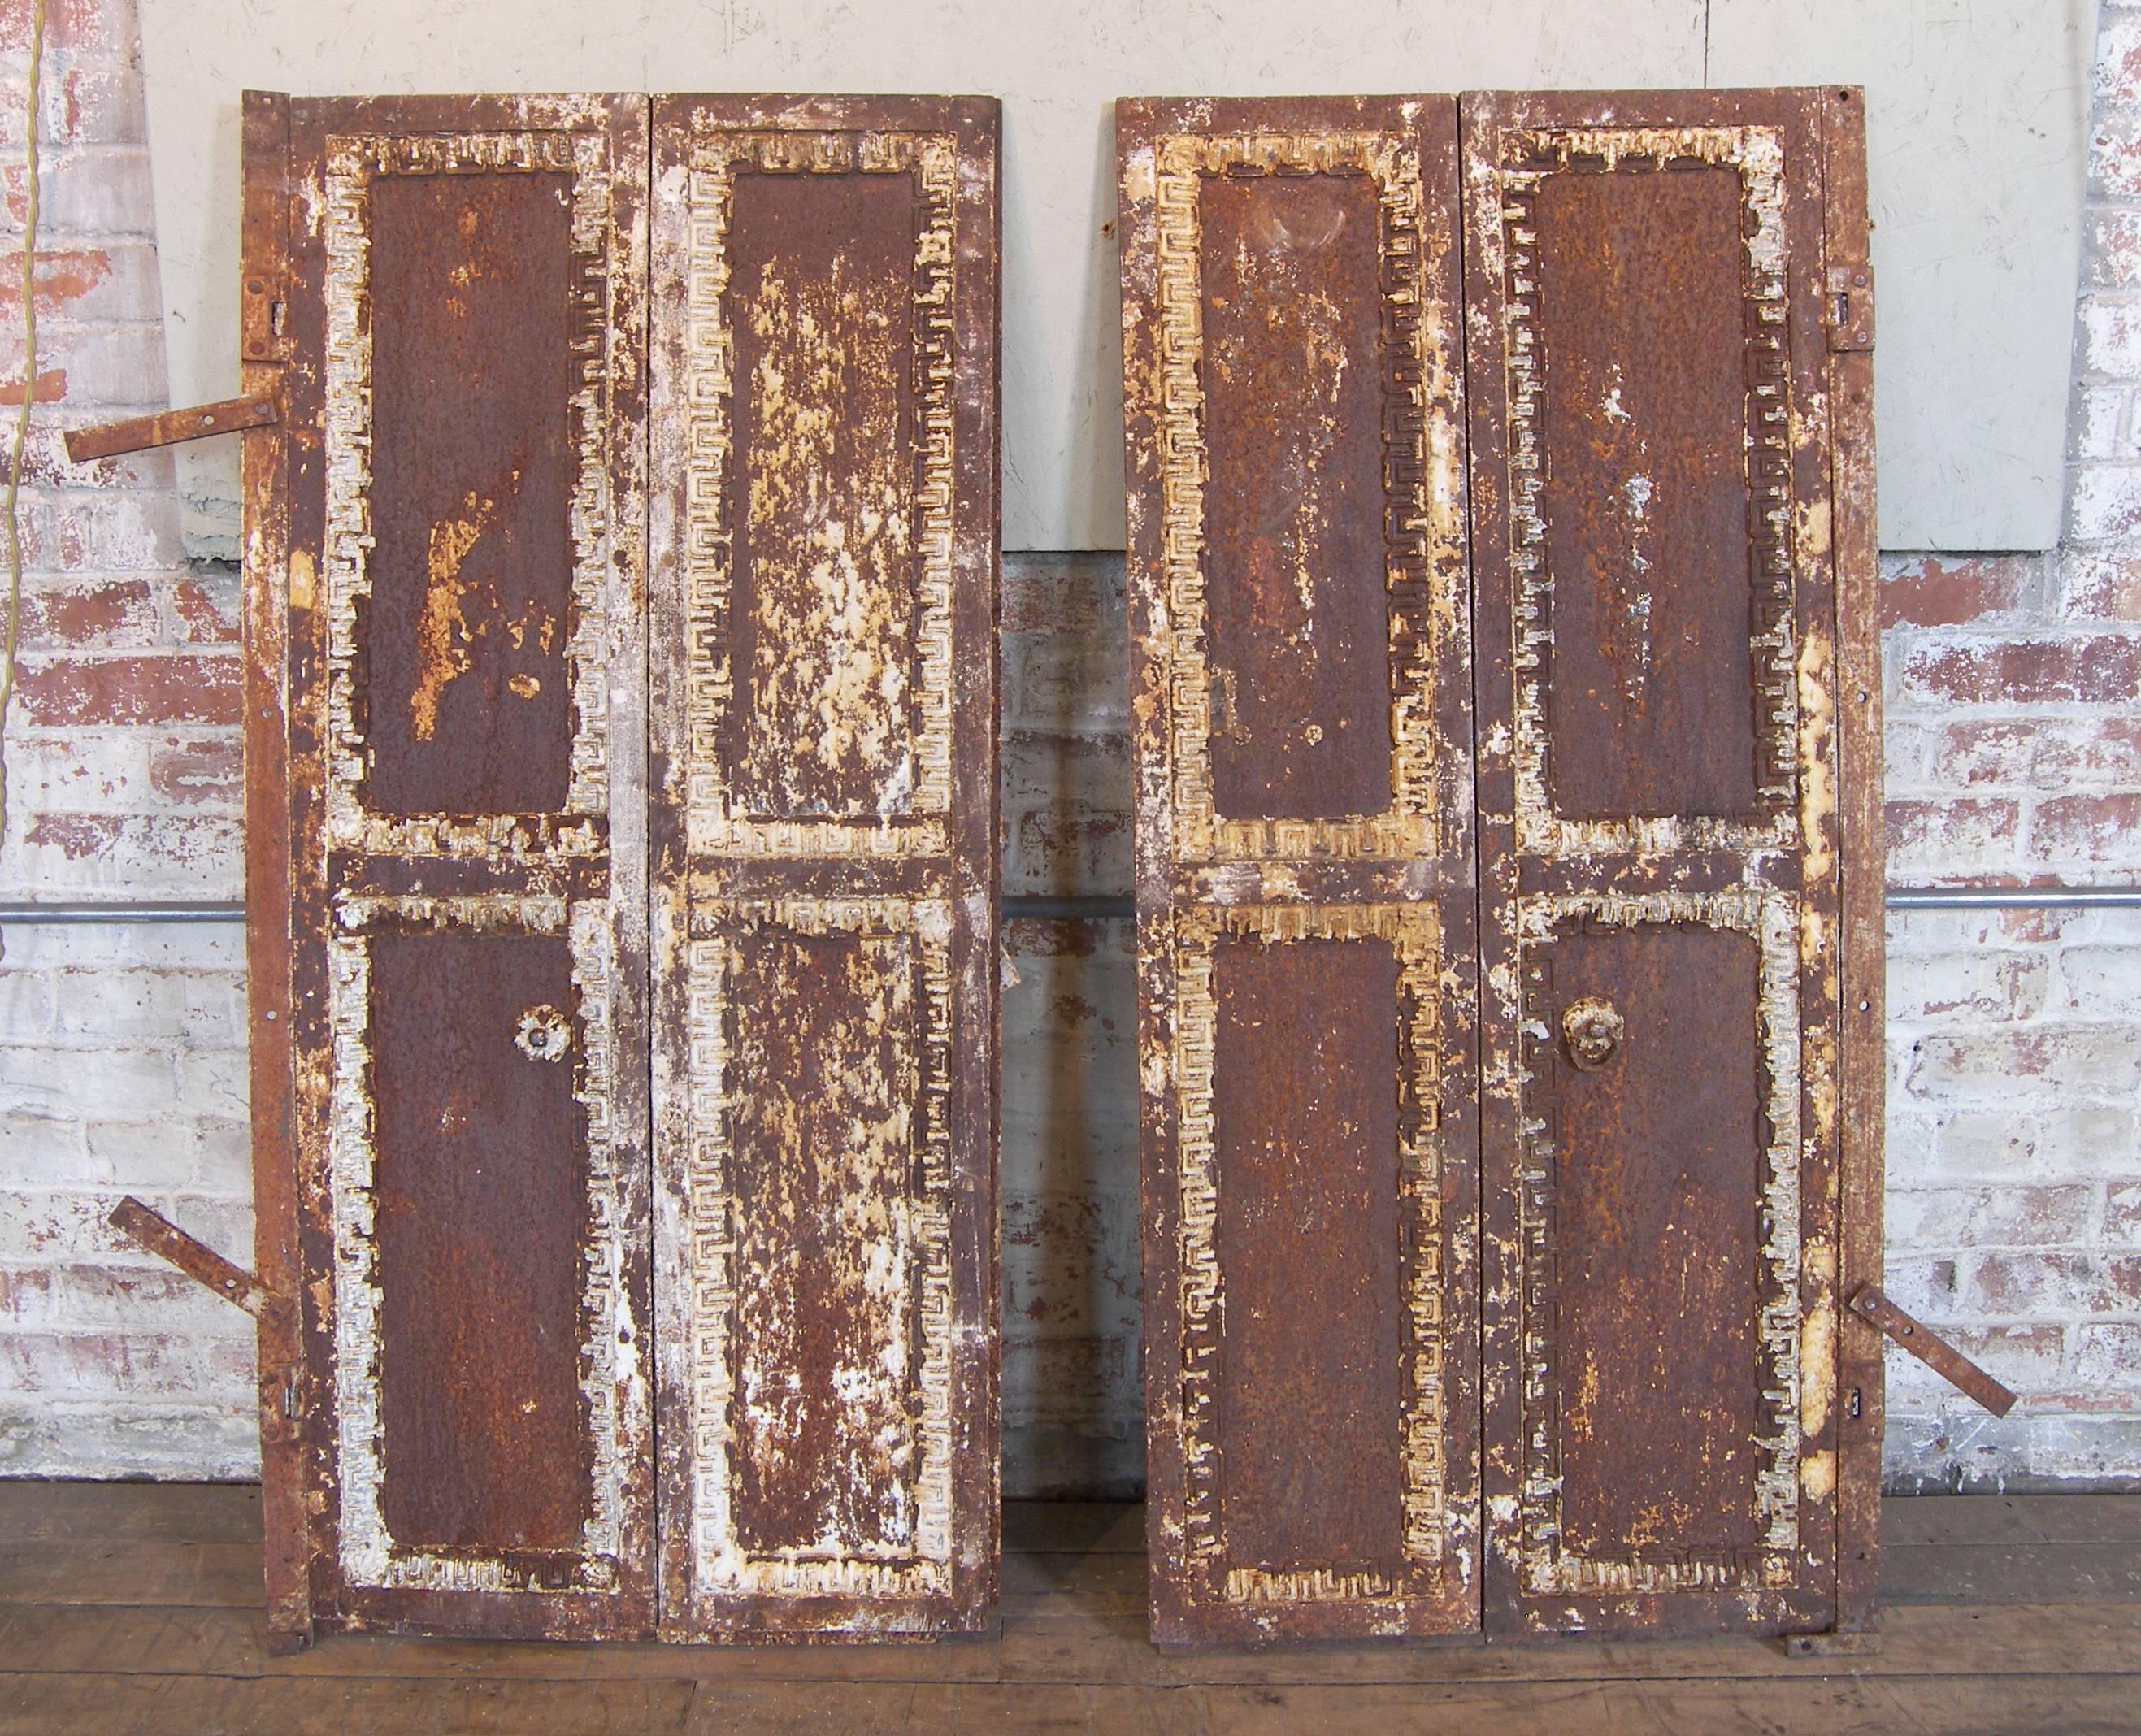 Pair of Vintage Industrial Antique Window Shutters / Doors Made of Cast Iron. Beautiful Rusted Patina with Neoclassical Greek Key.